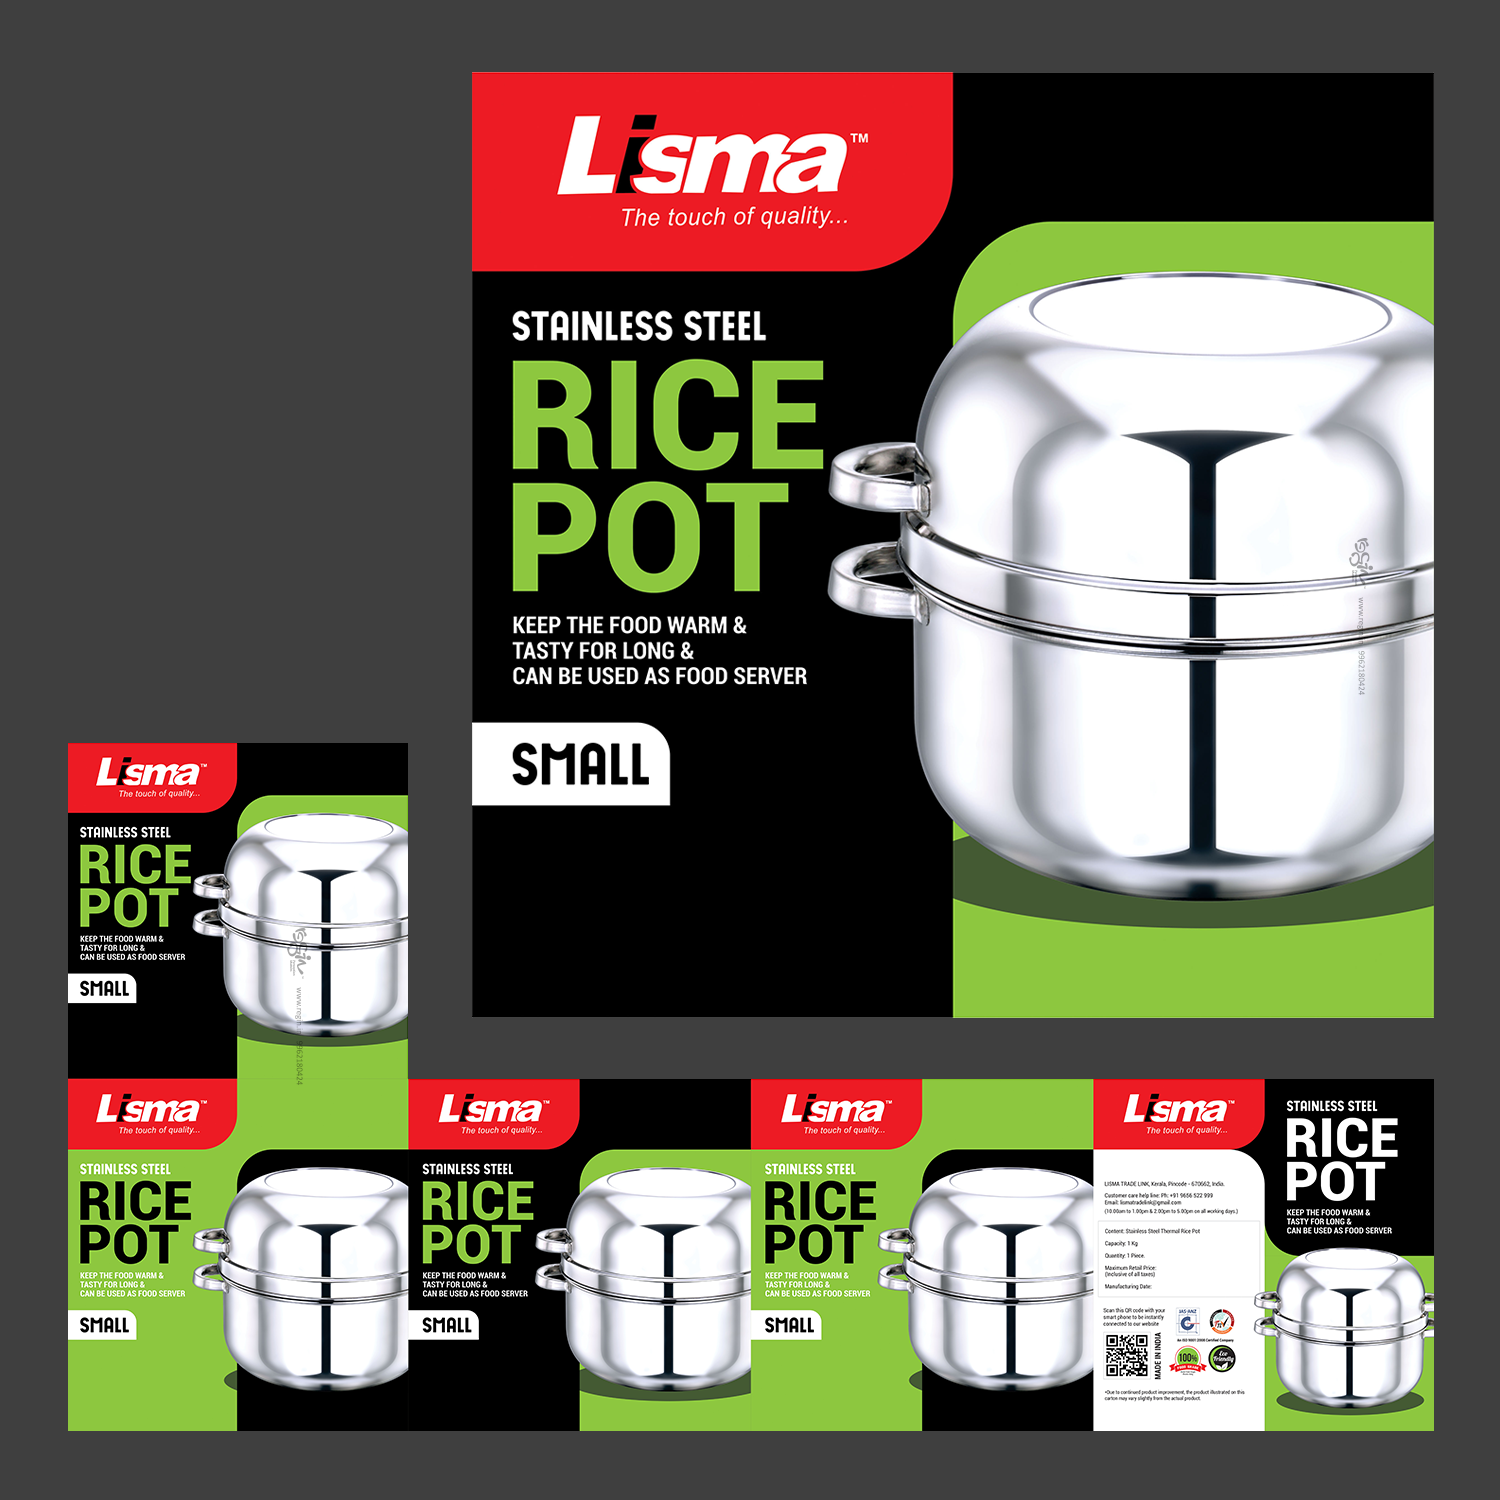 Lisma Stainless steel Products